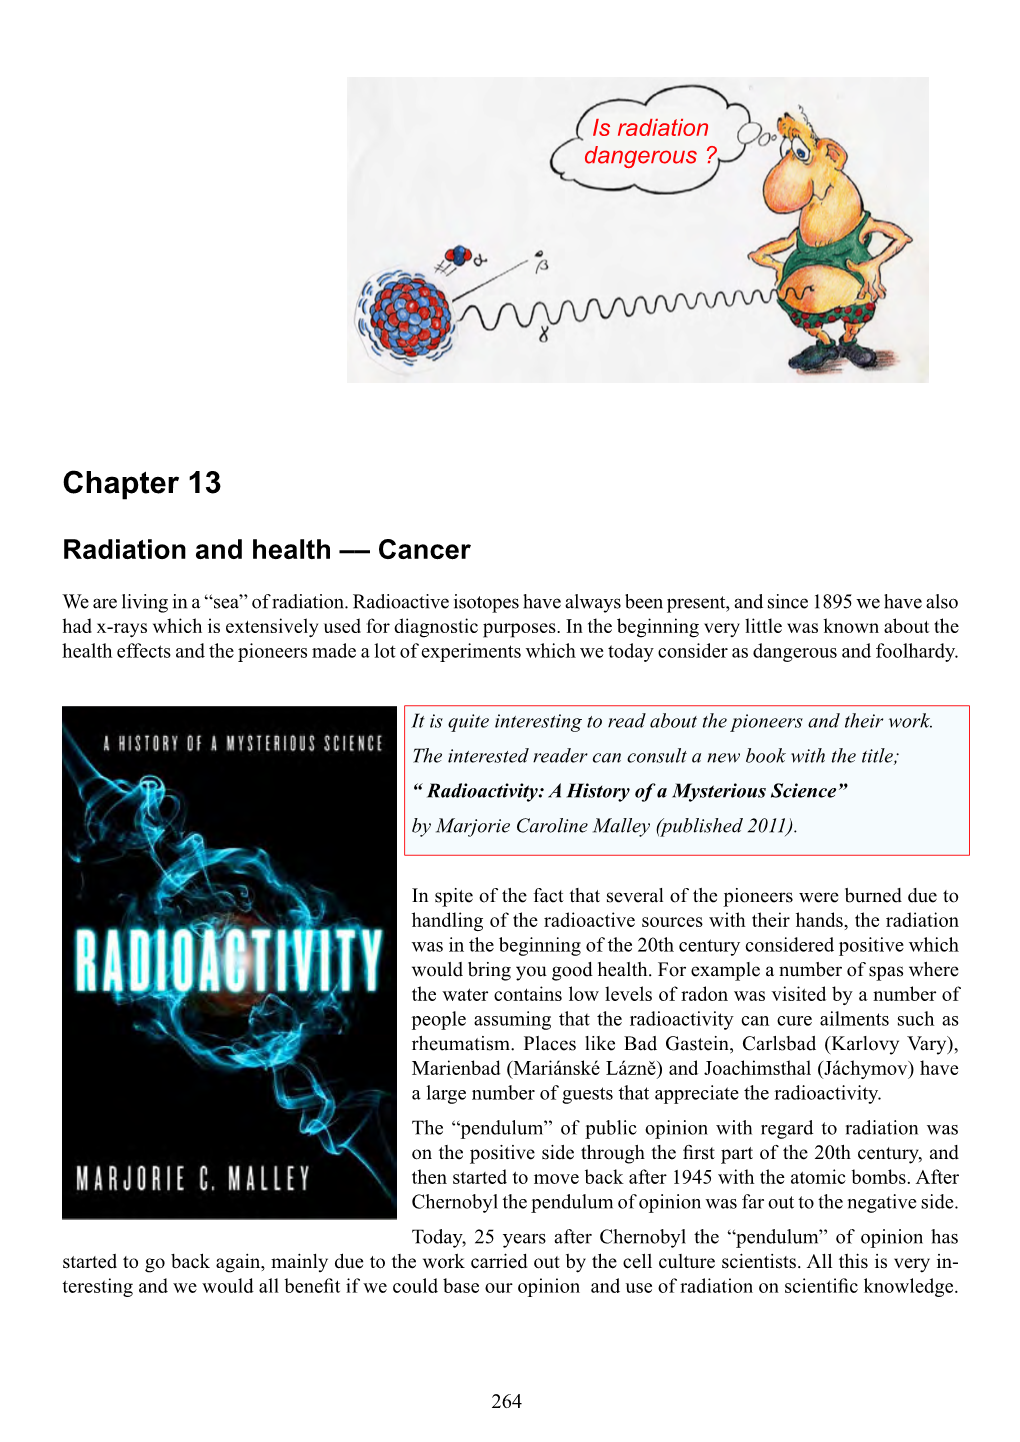 Chapter 13 Radiation and Health –– Cancer